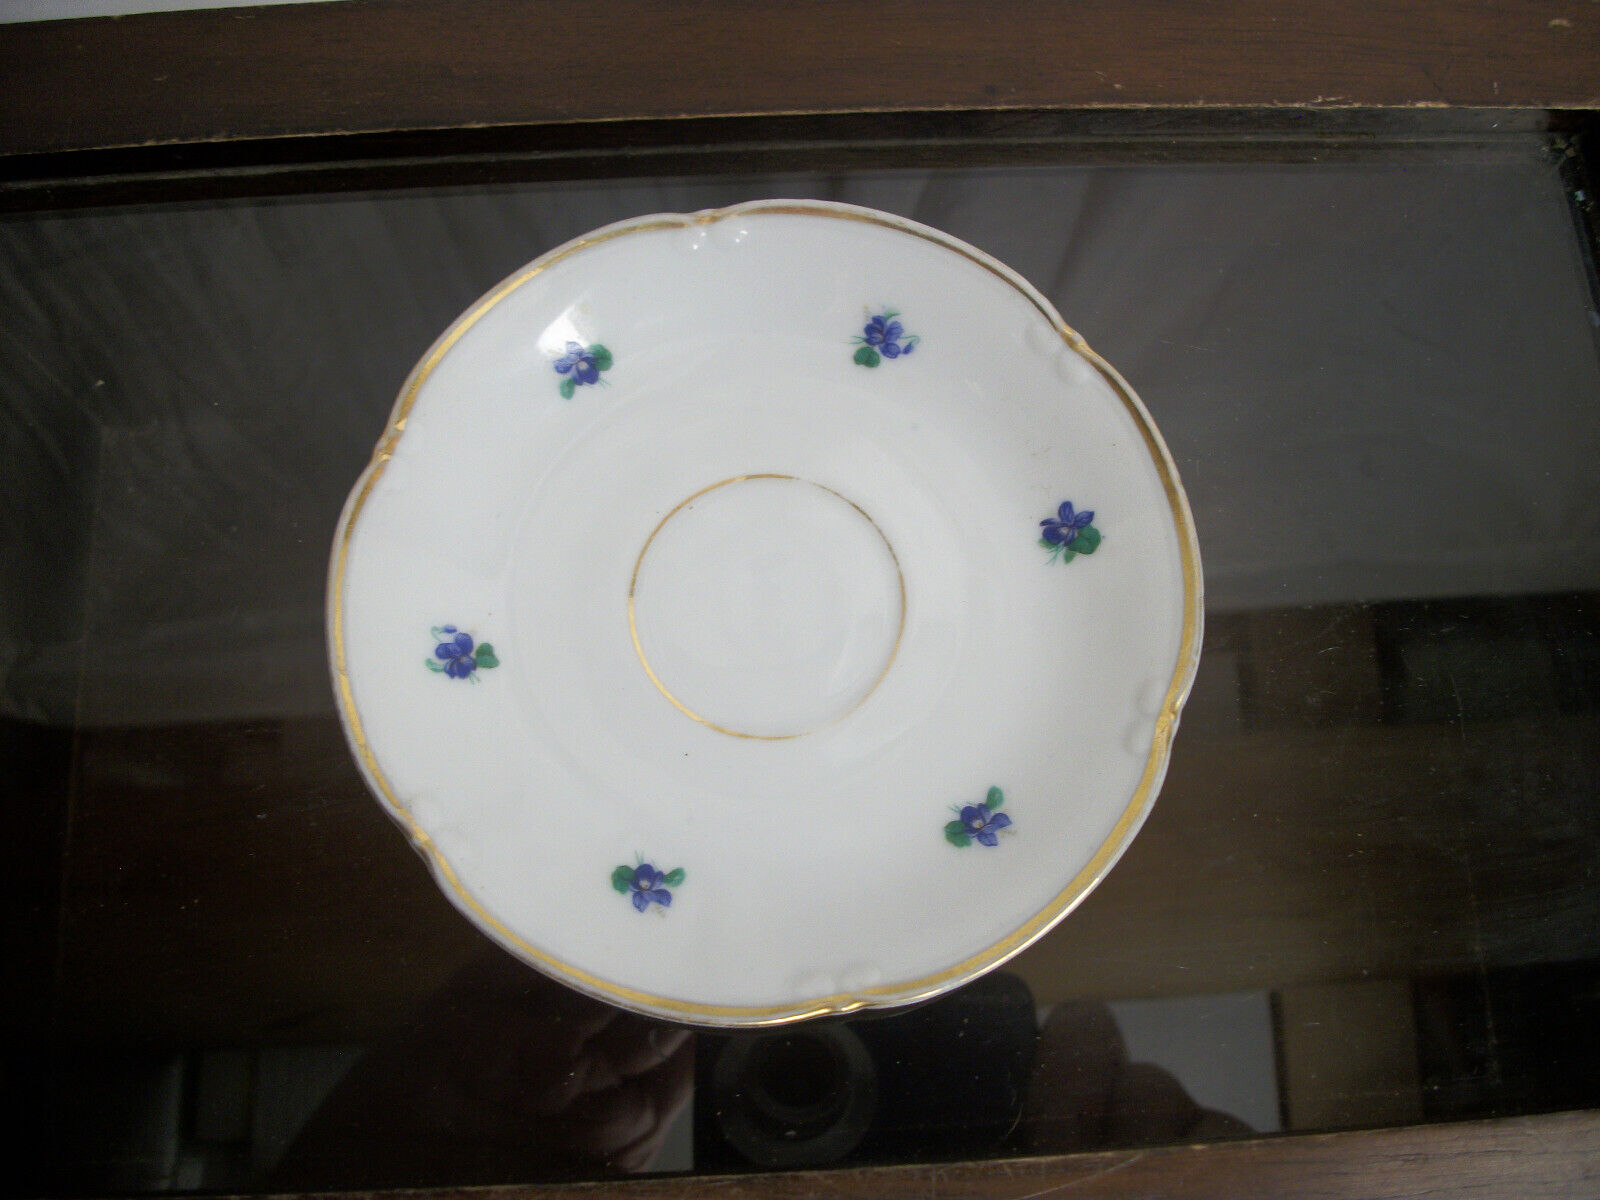 HERMANN OHME Saucer Violtets, Gold Trim, 4 1/2 wide, Germany